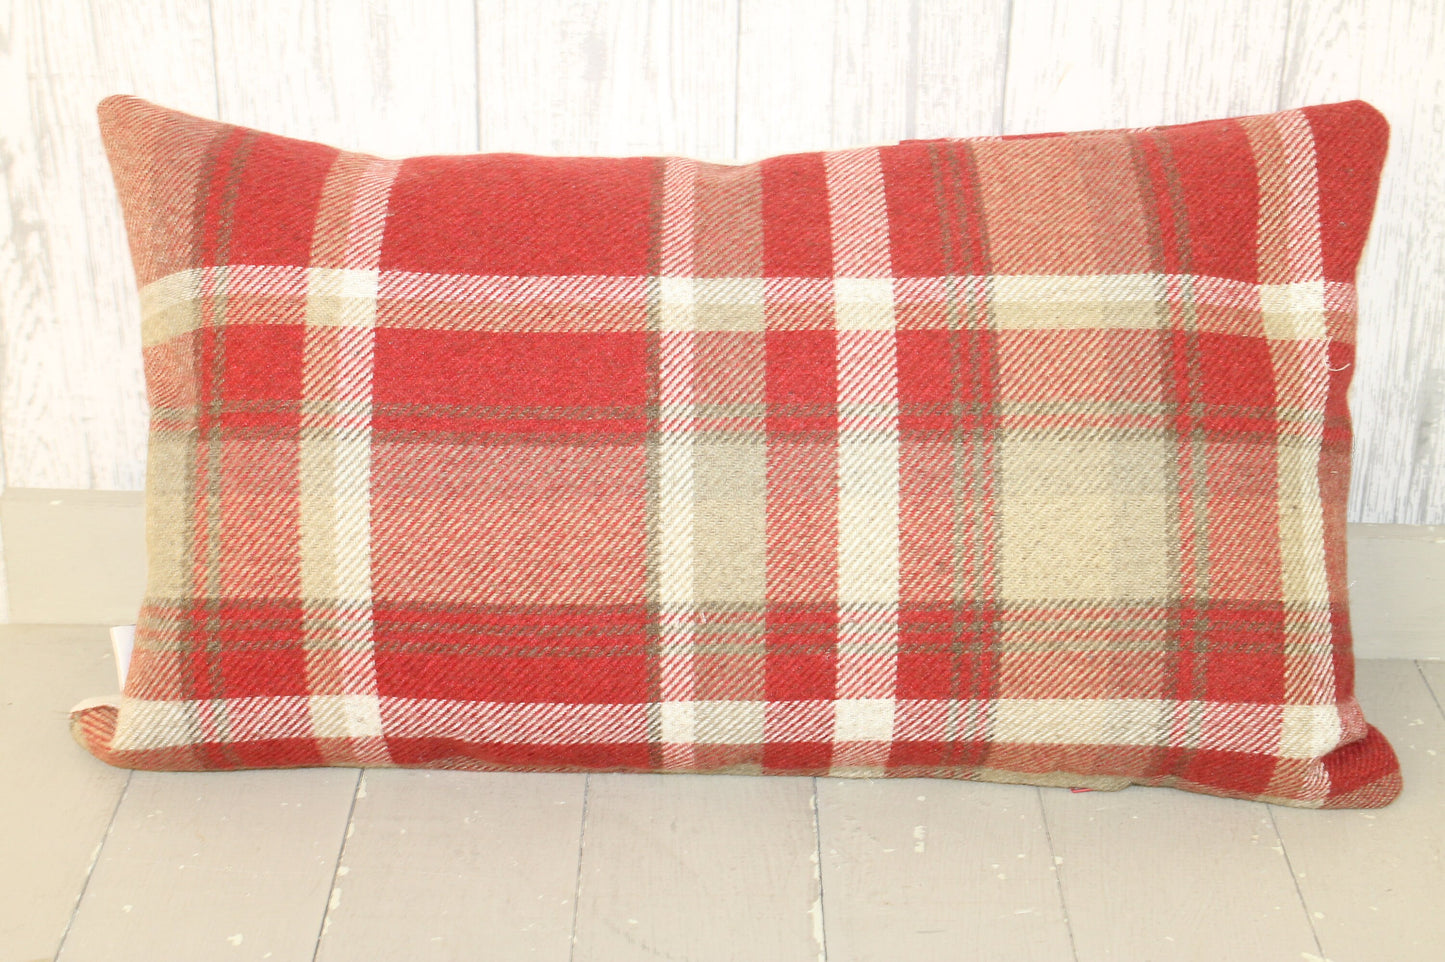 Cartref Cushion-Personalised Cushion- Quote Cushion- Red Check Wool touch and Cream long cushion. Personalised cushion- Handmade cushion